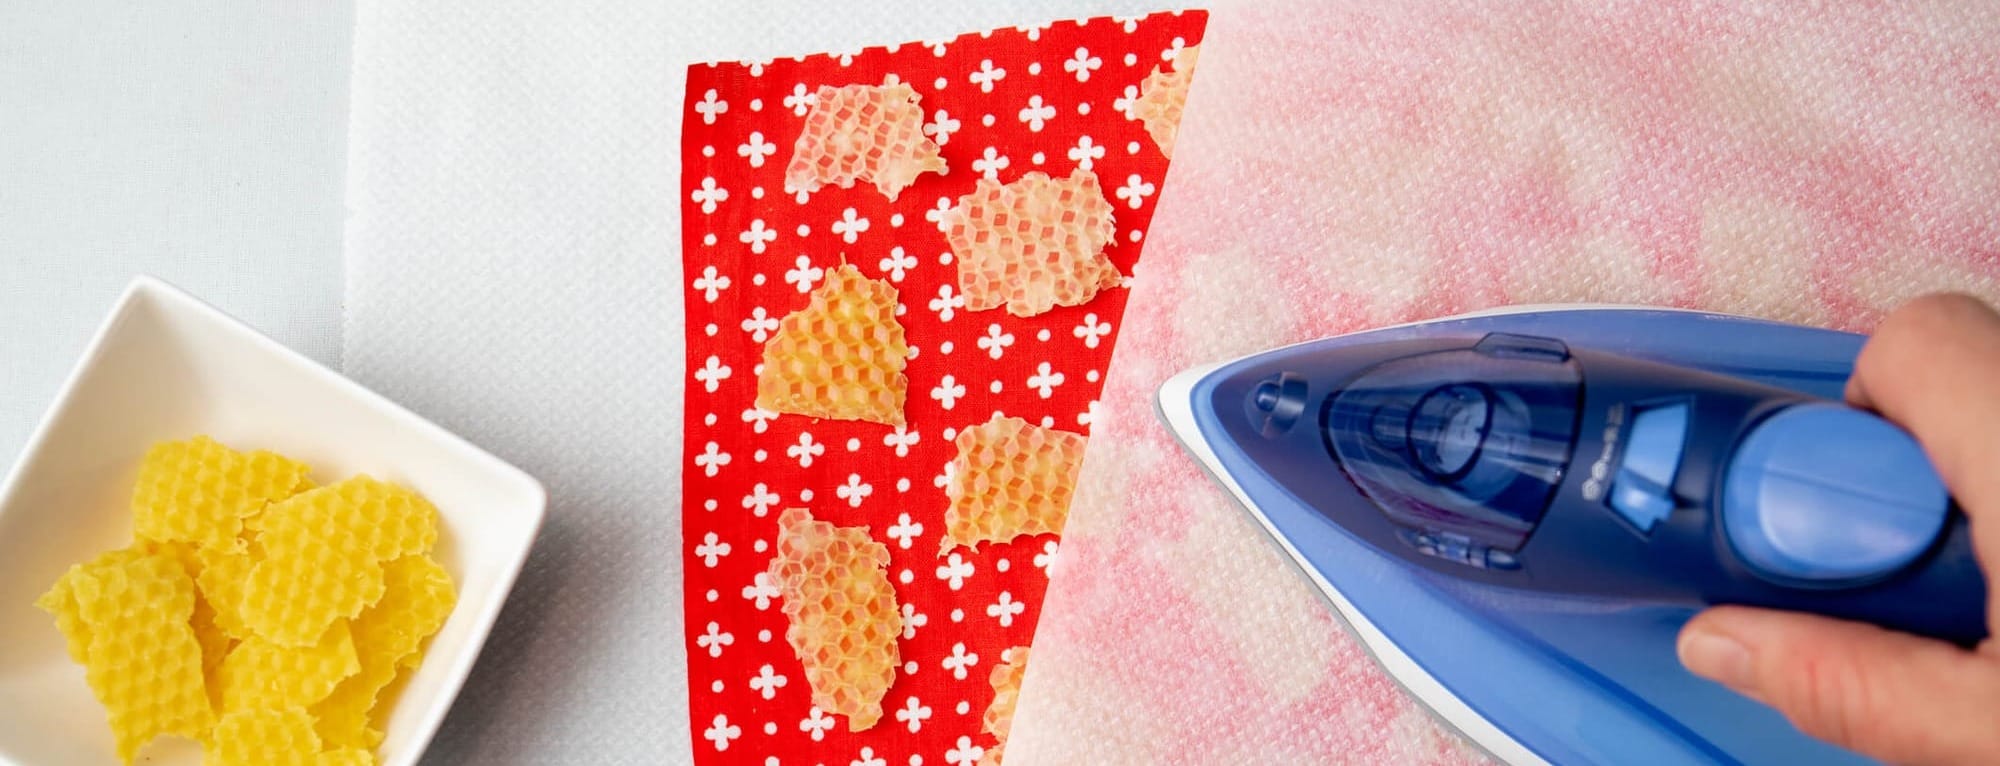 rewaxing beeswax wrap by Helin Loik-Tomson